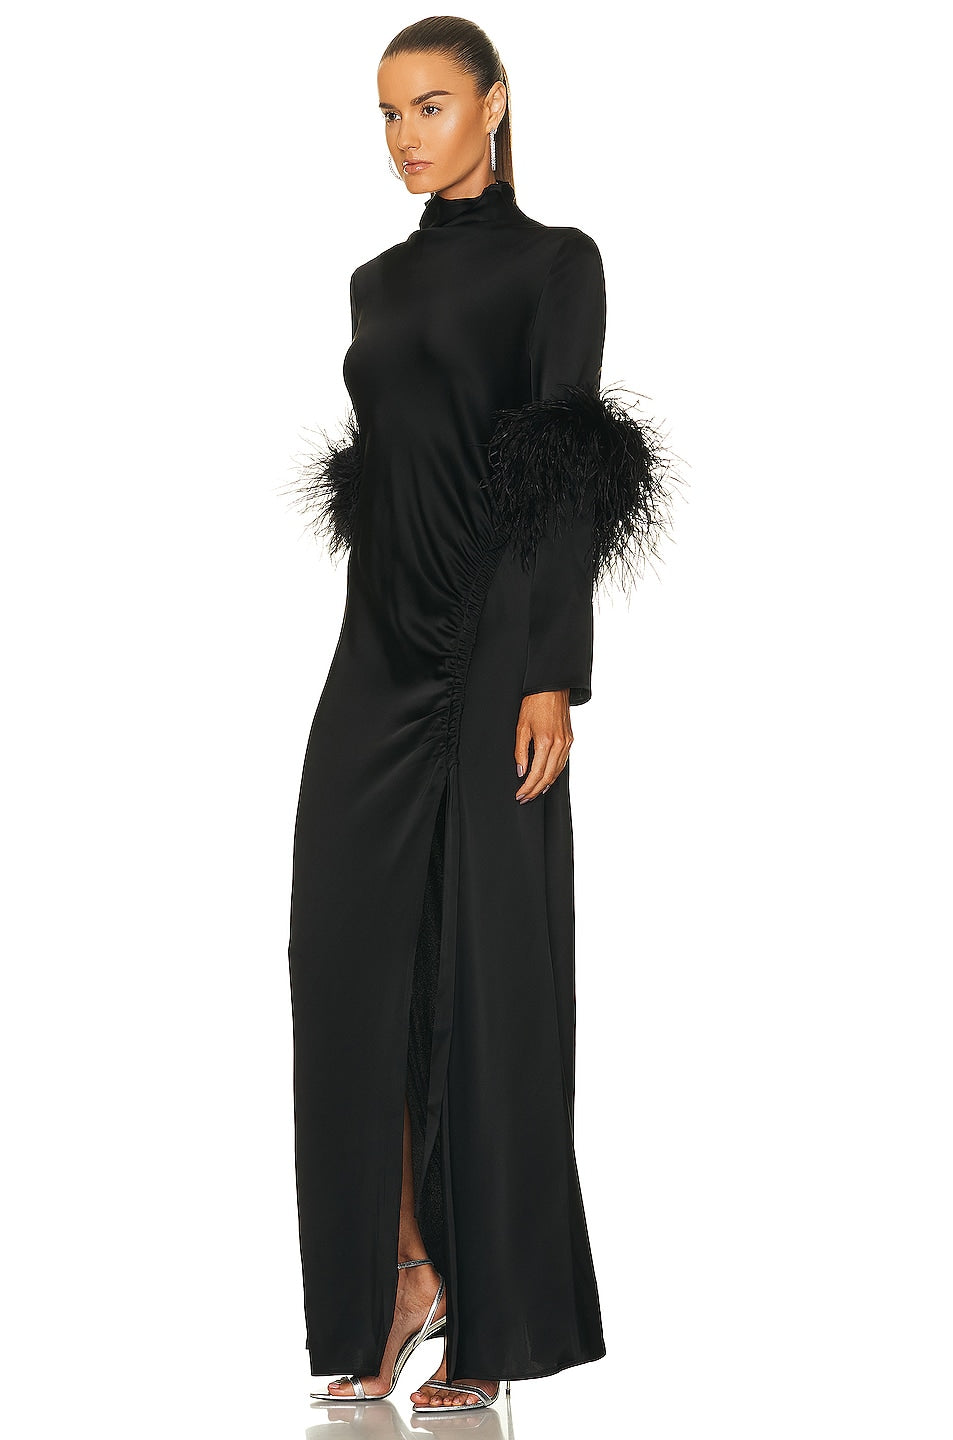 Lapointe Ostrich Feather Slit Maxi Dress in Black SIZE 2 -new no tags